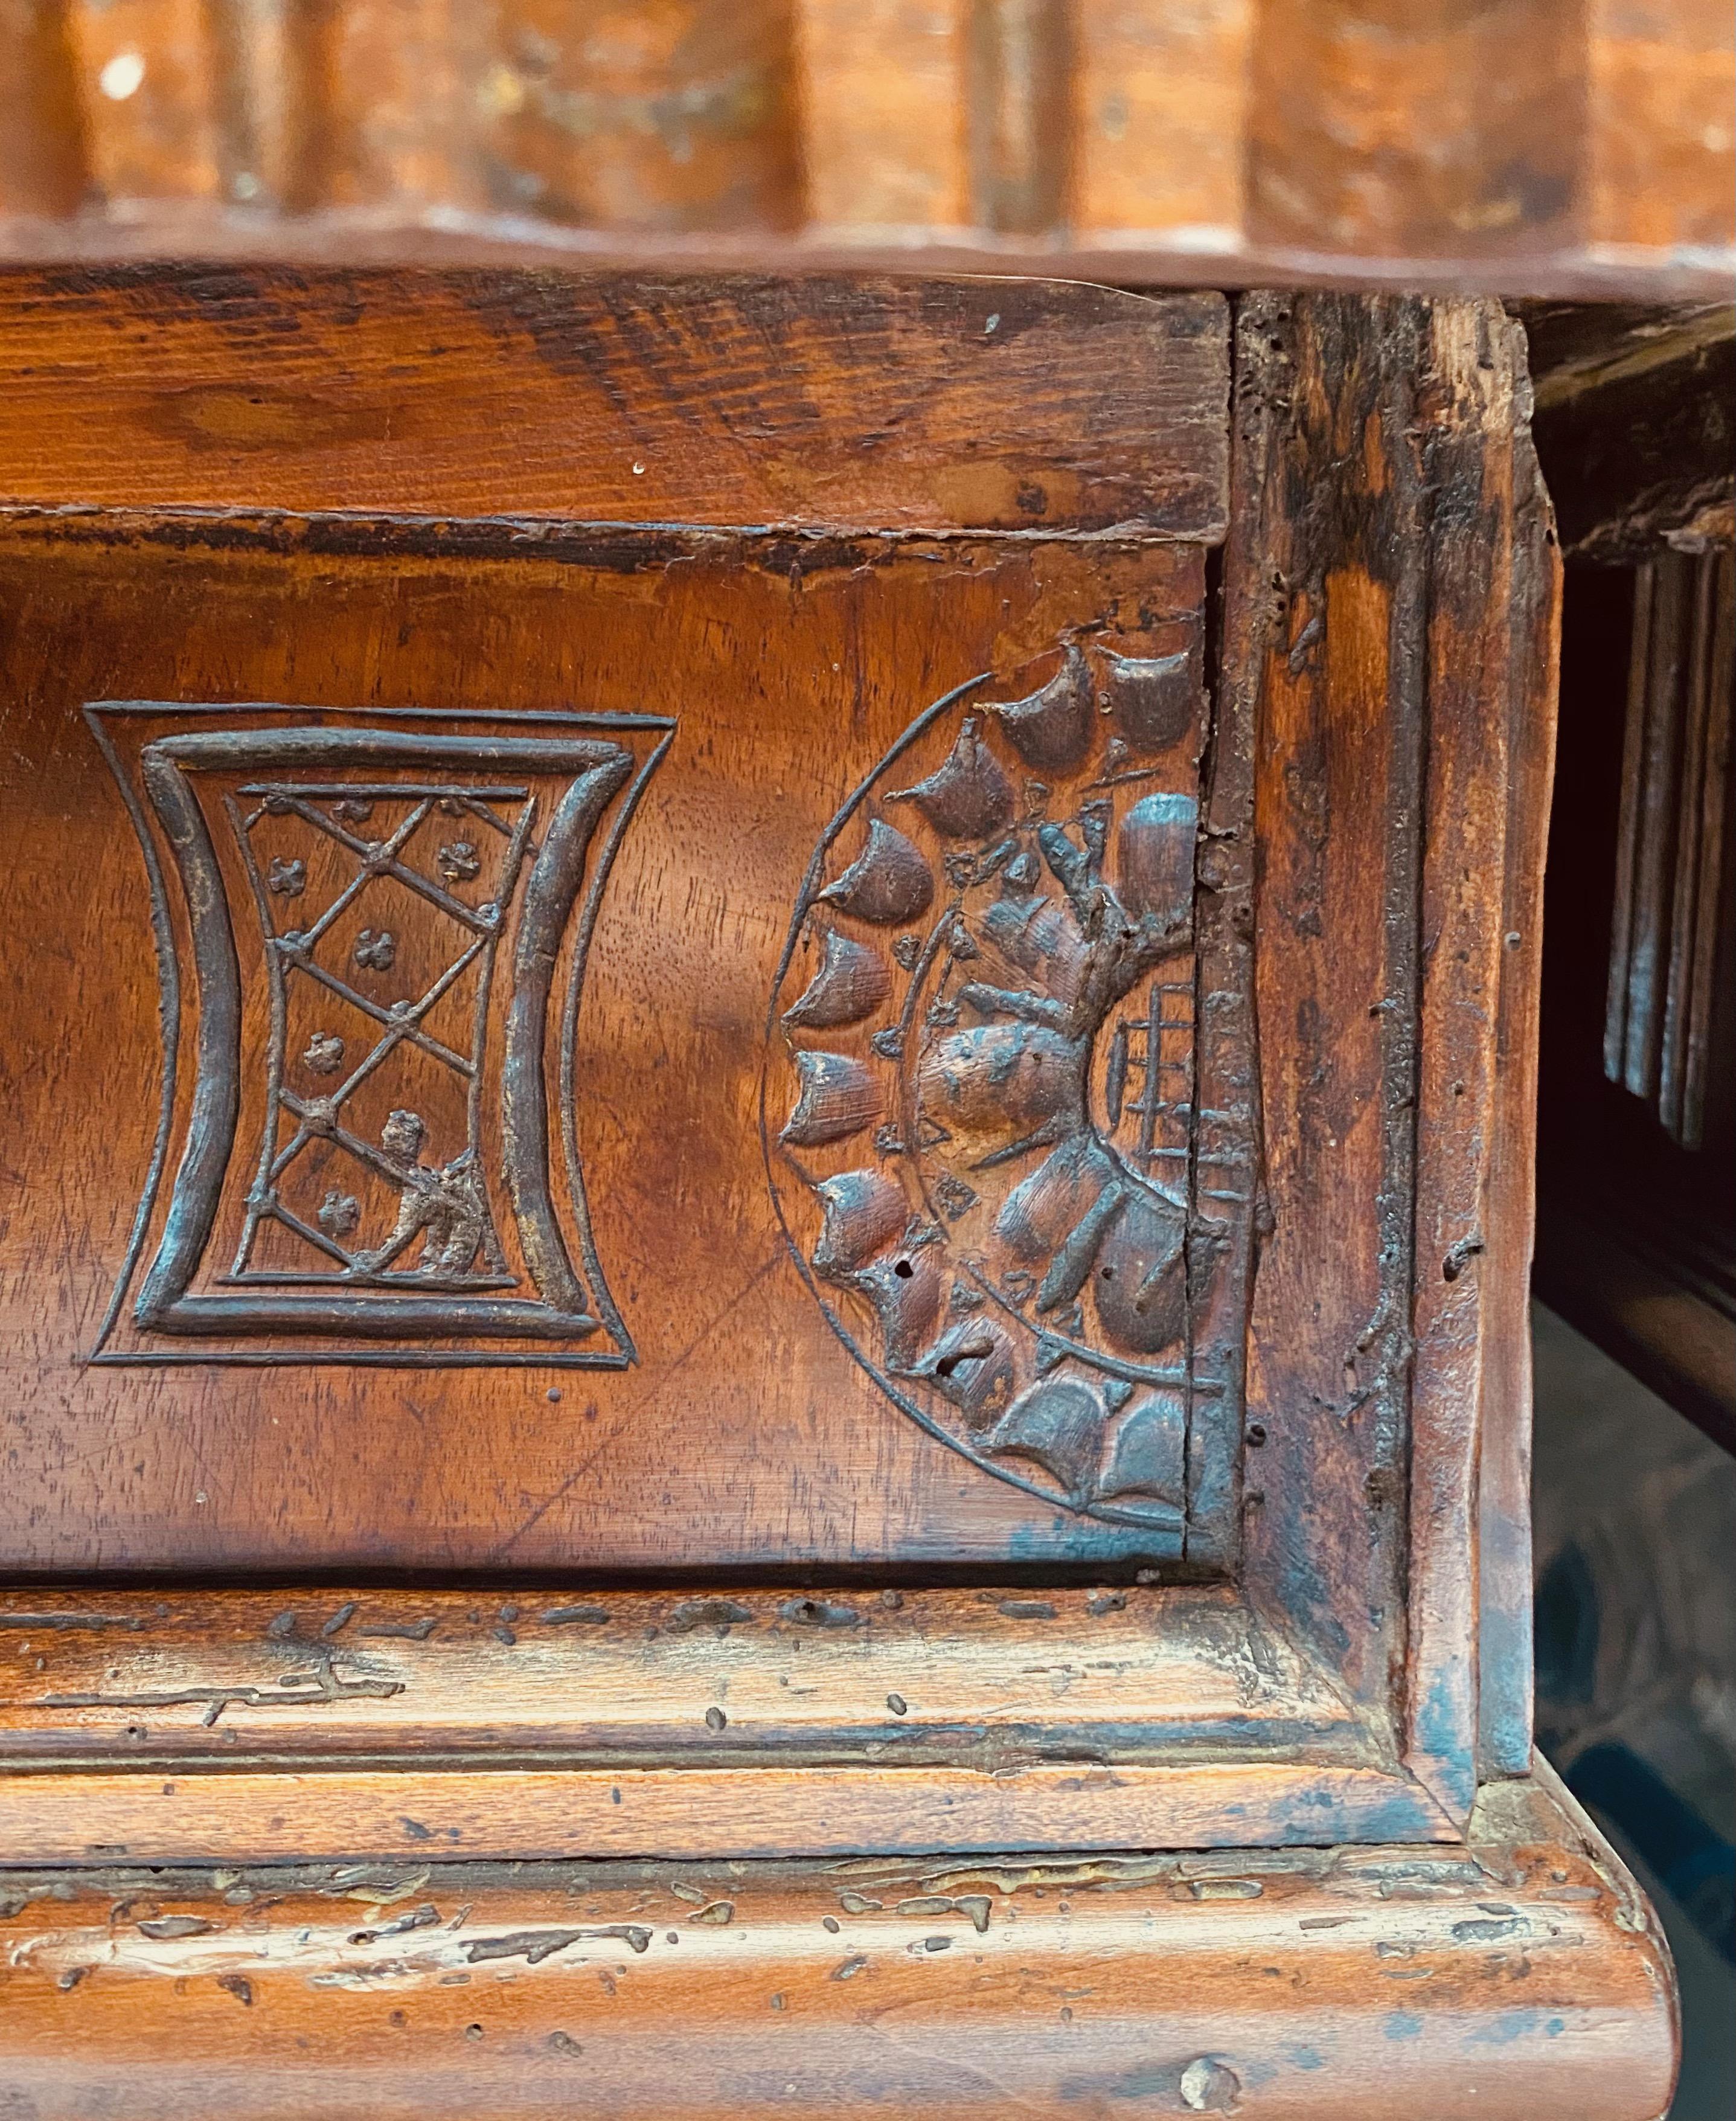 17th Century 17th Cent. Portugese Chip Carved Desk, w. Portraits of Royalty on top and sides